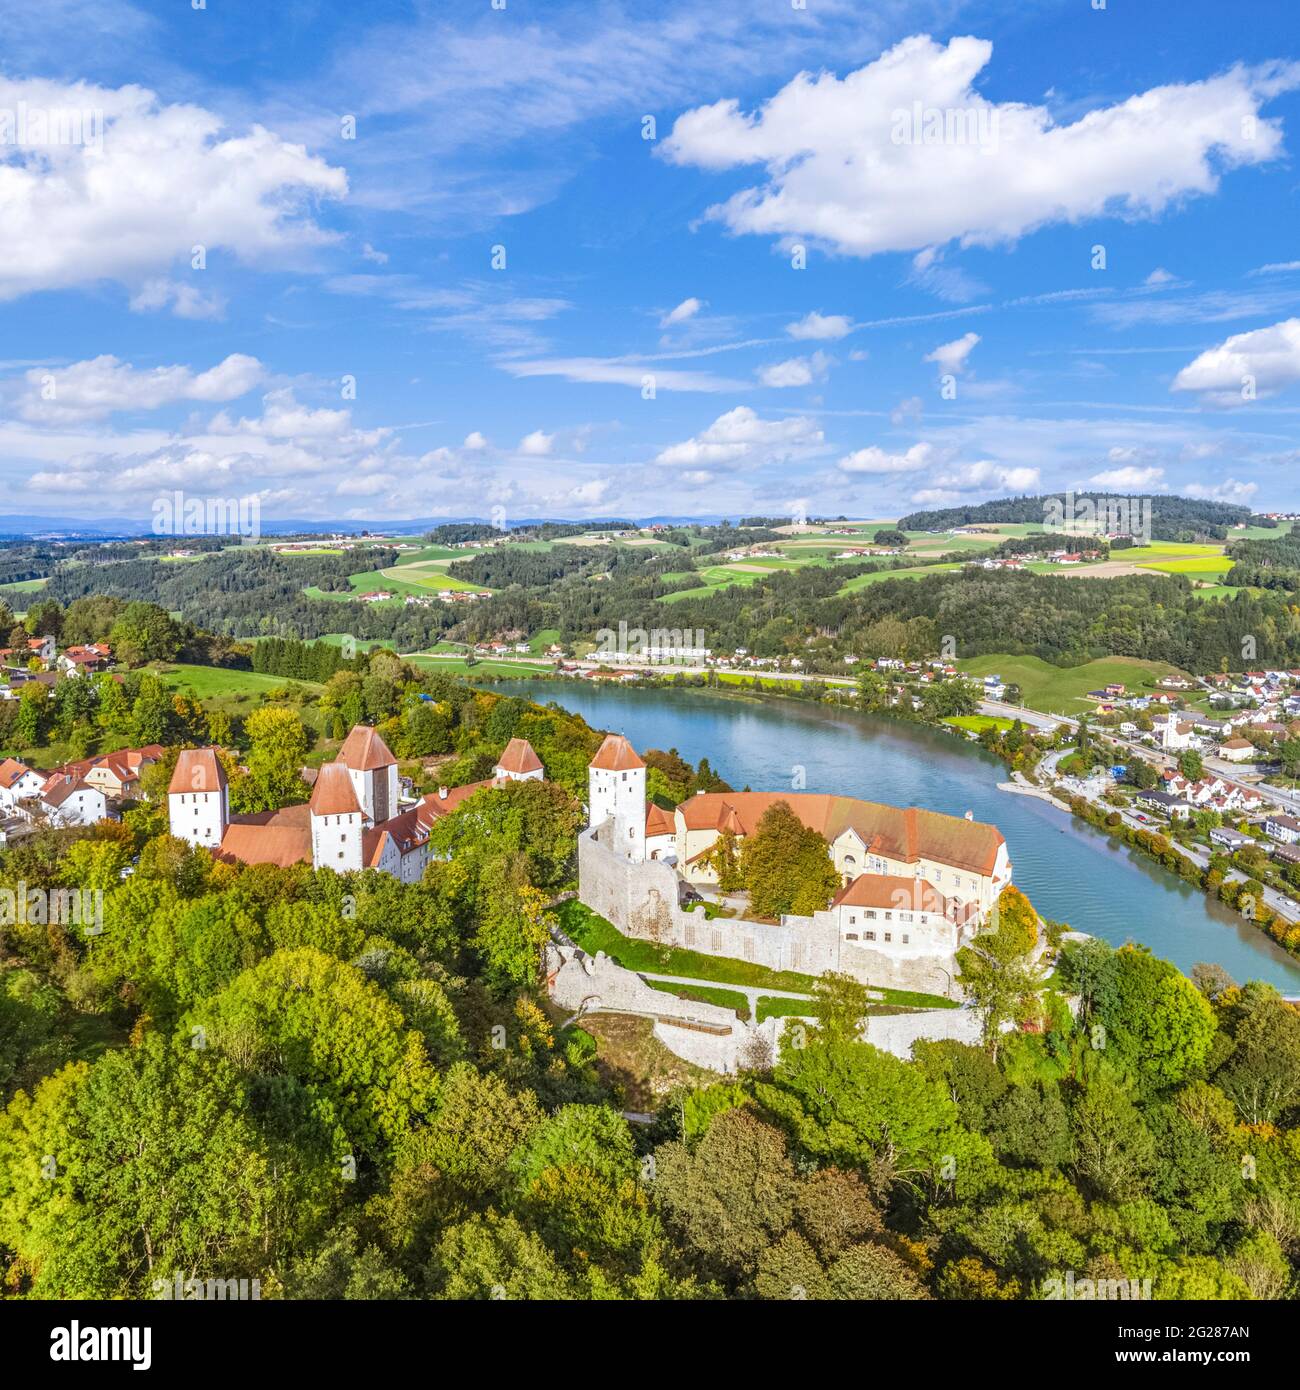 View of Neuburg am Inn Castle in the Donau-Wald region in the district of Passau, on the border with (Upper) Austria. Stock Photo